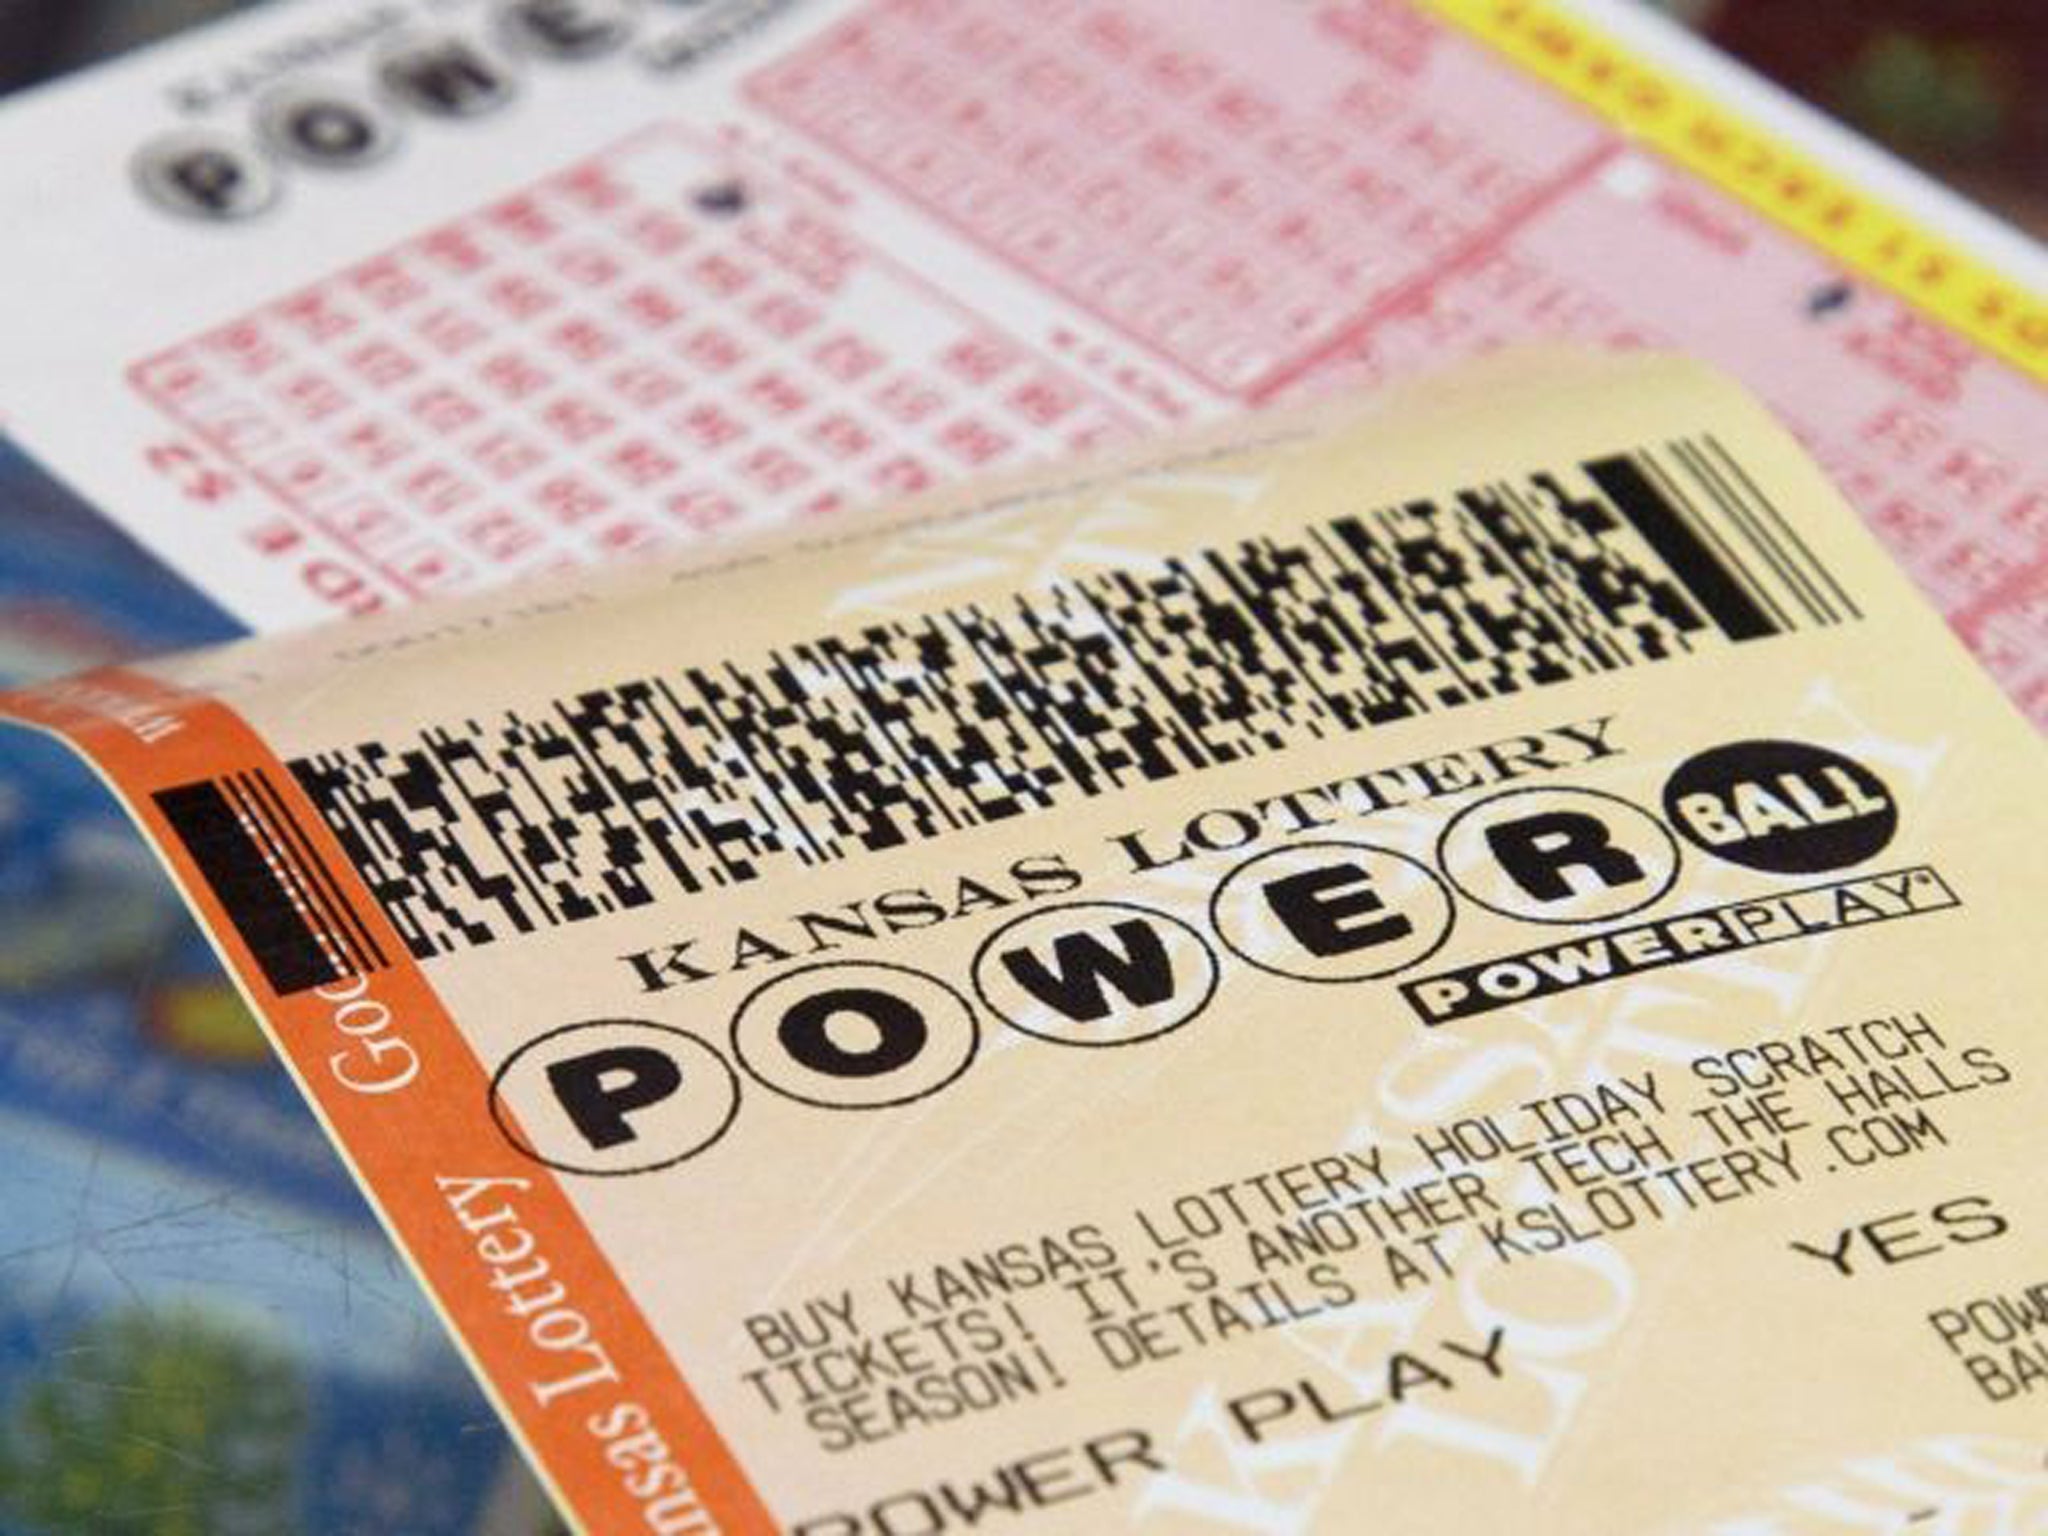 A Powerball form and purchased ticket